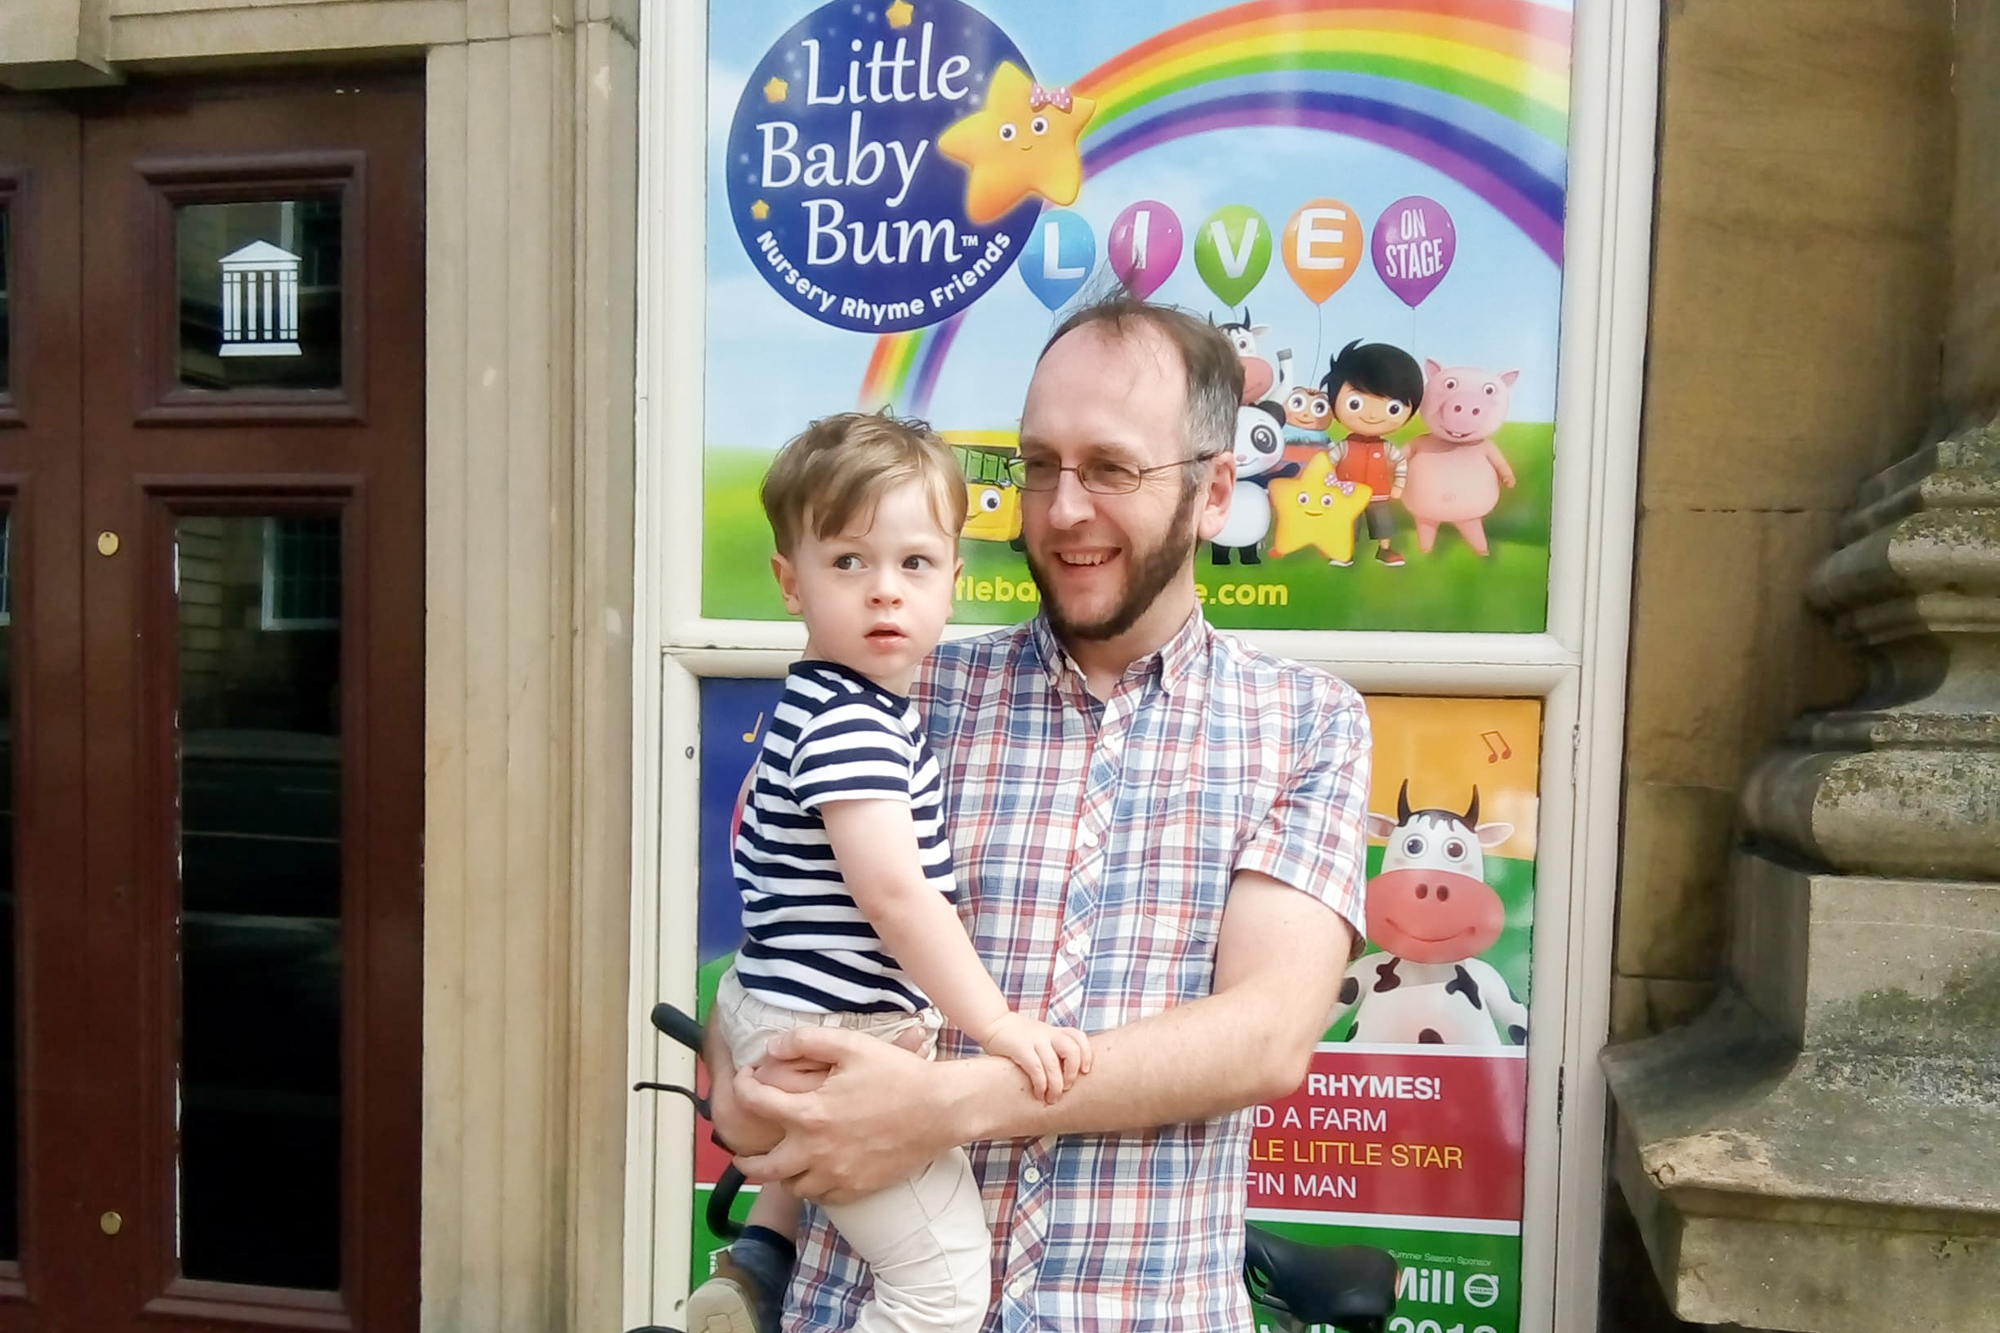 Jonah and Martin at the Little Baby Bum live show